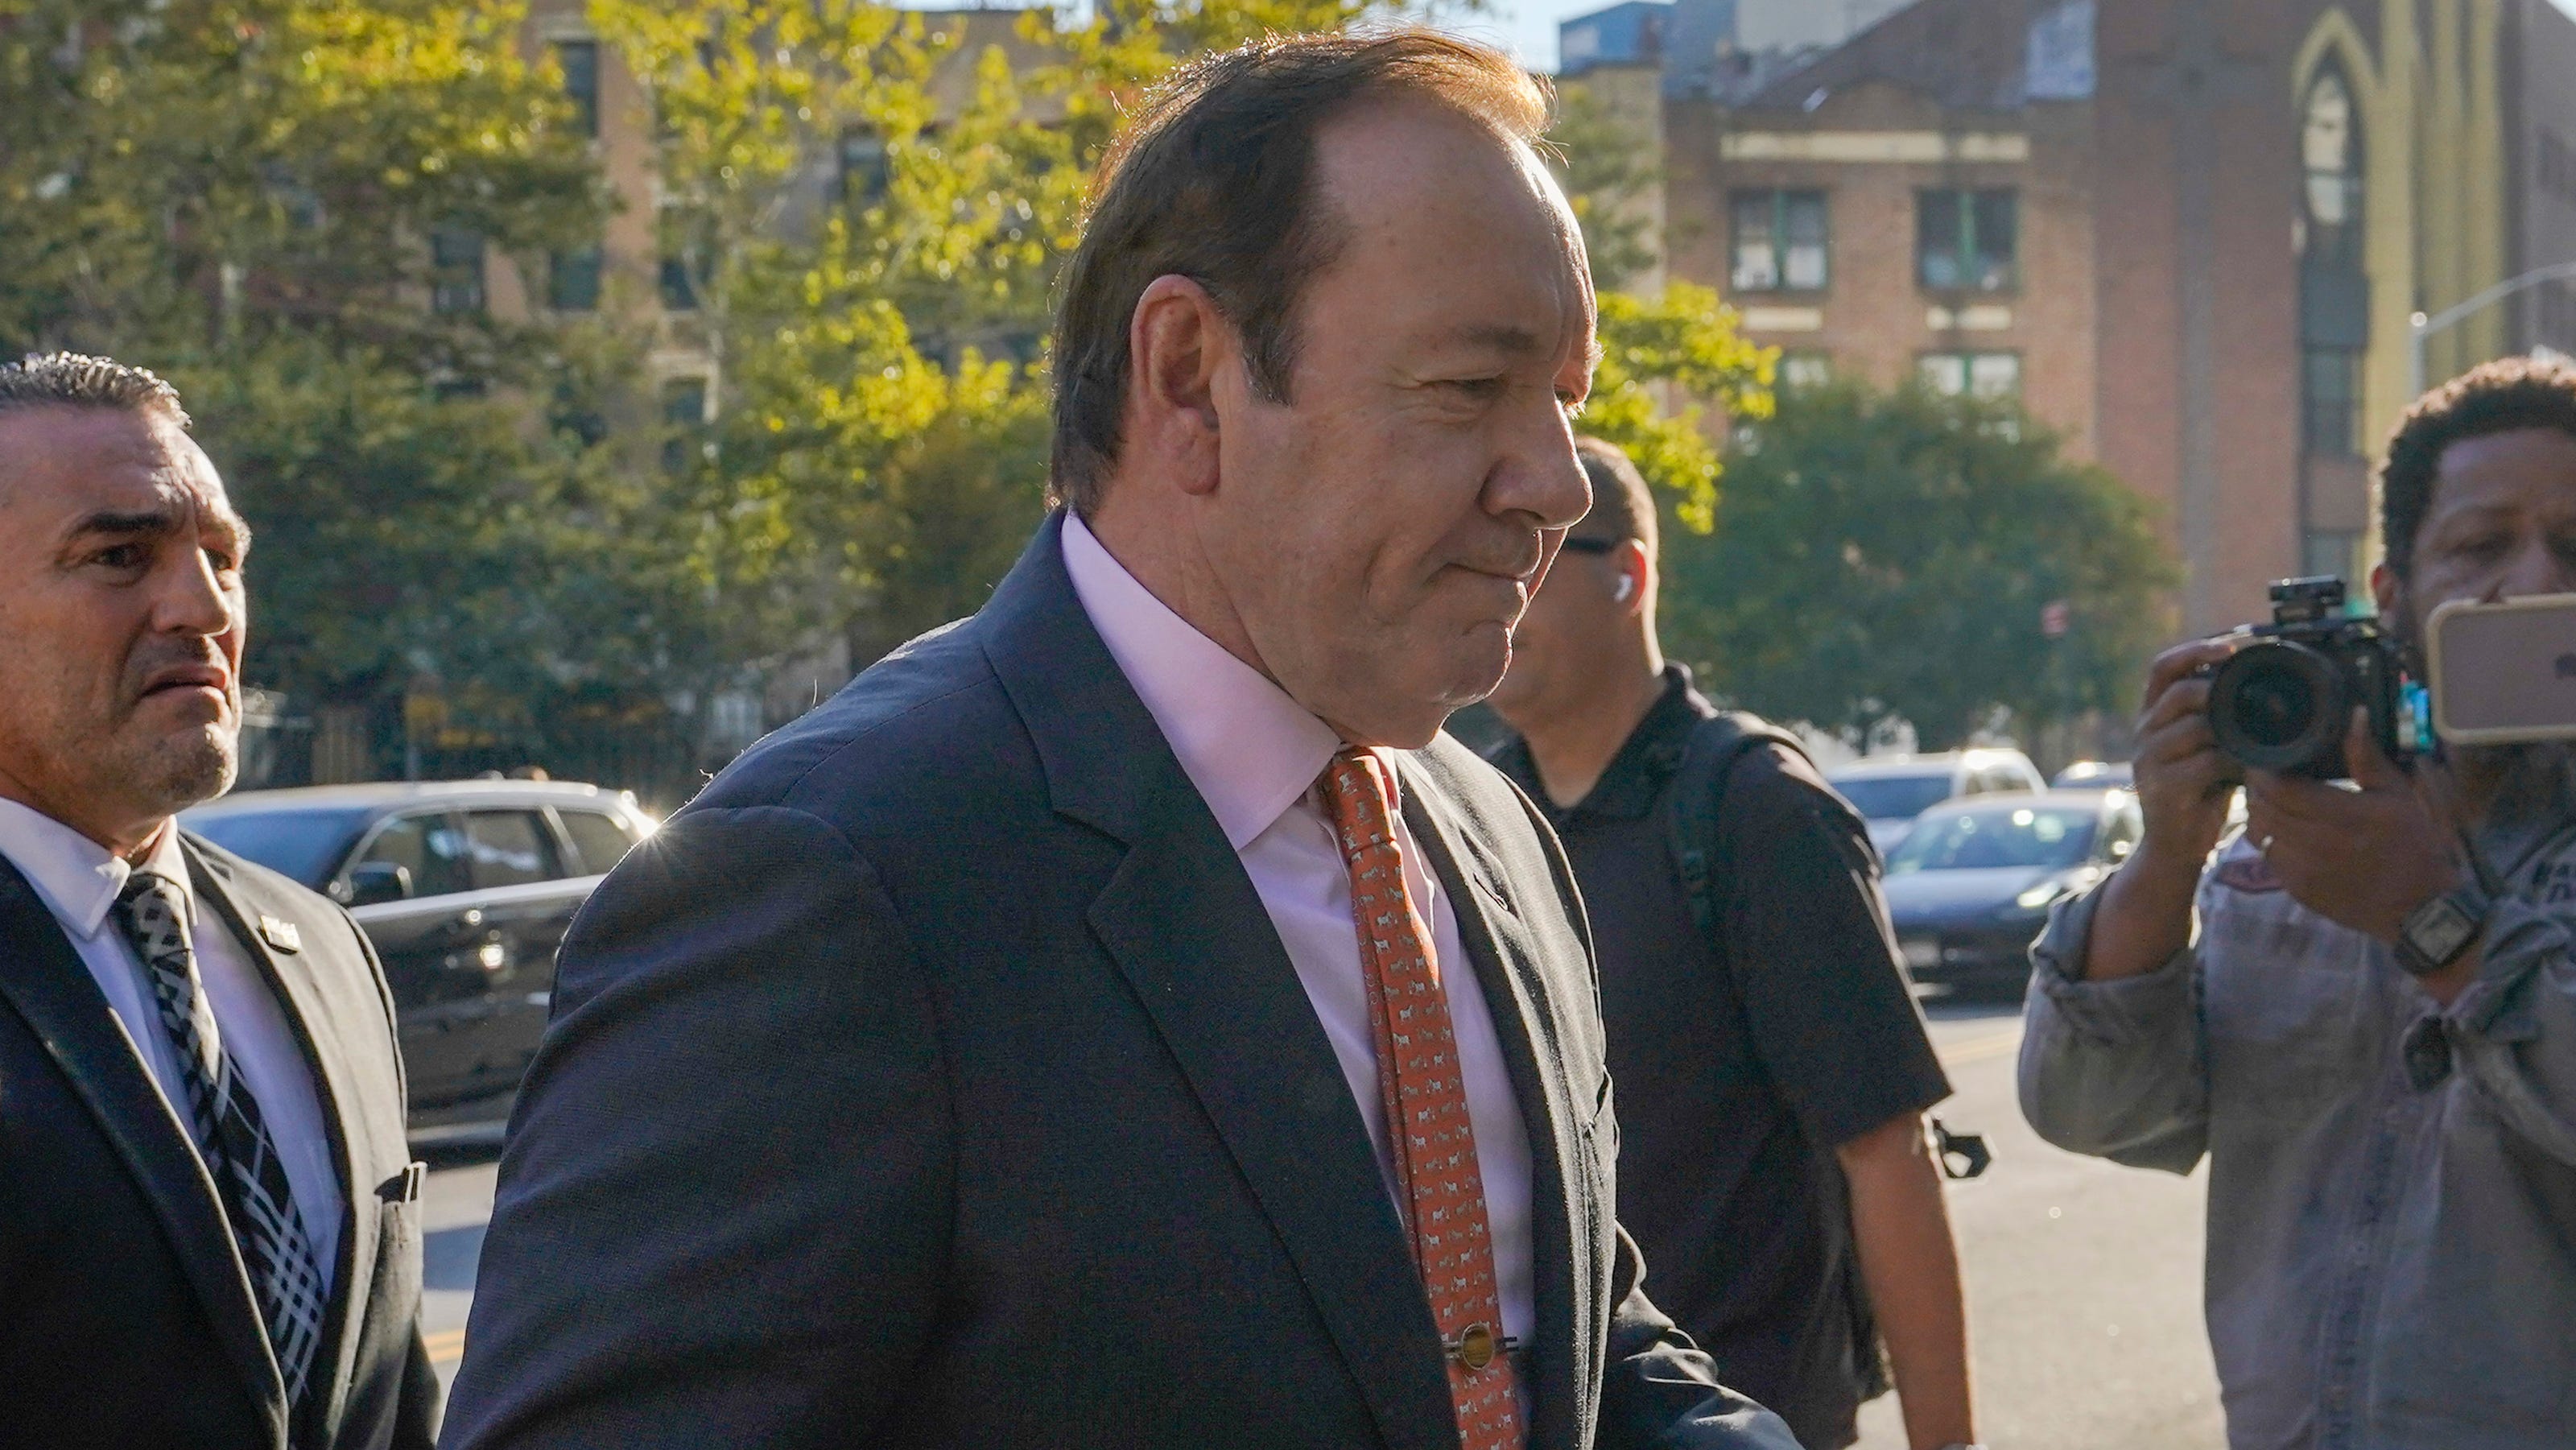 kevin-spacey-denies-anthony-rapp-claims-in-teary-testimony-says-managers-pressured-him-to-apologize